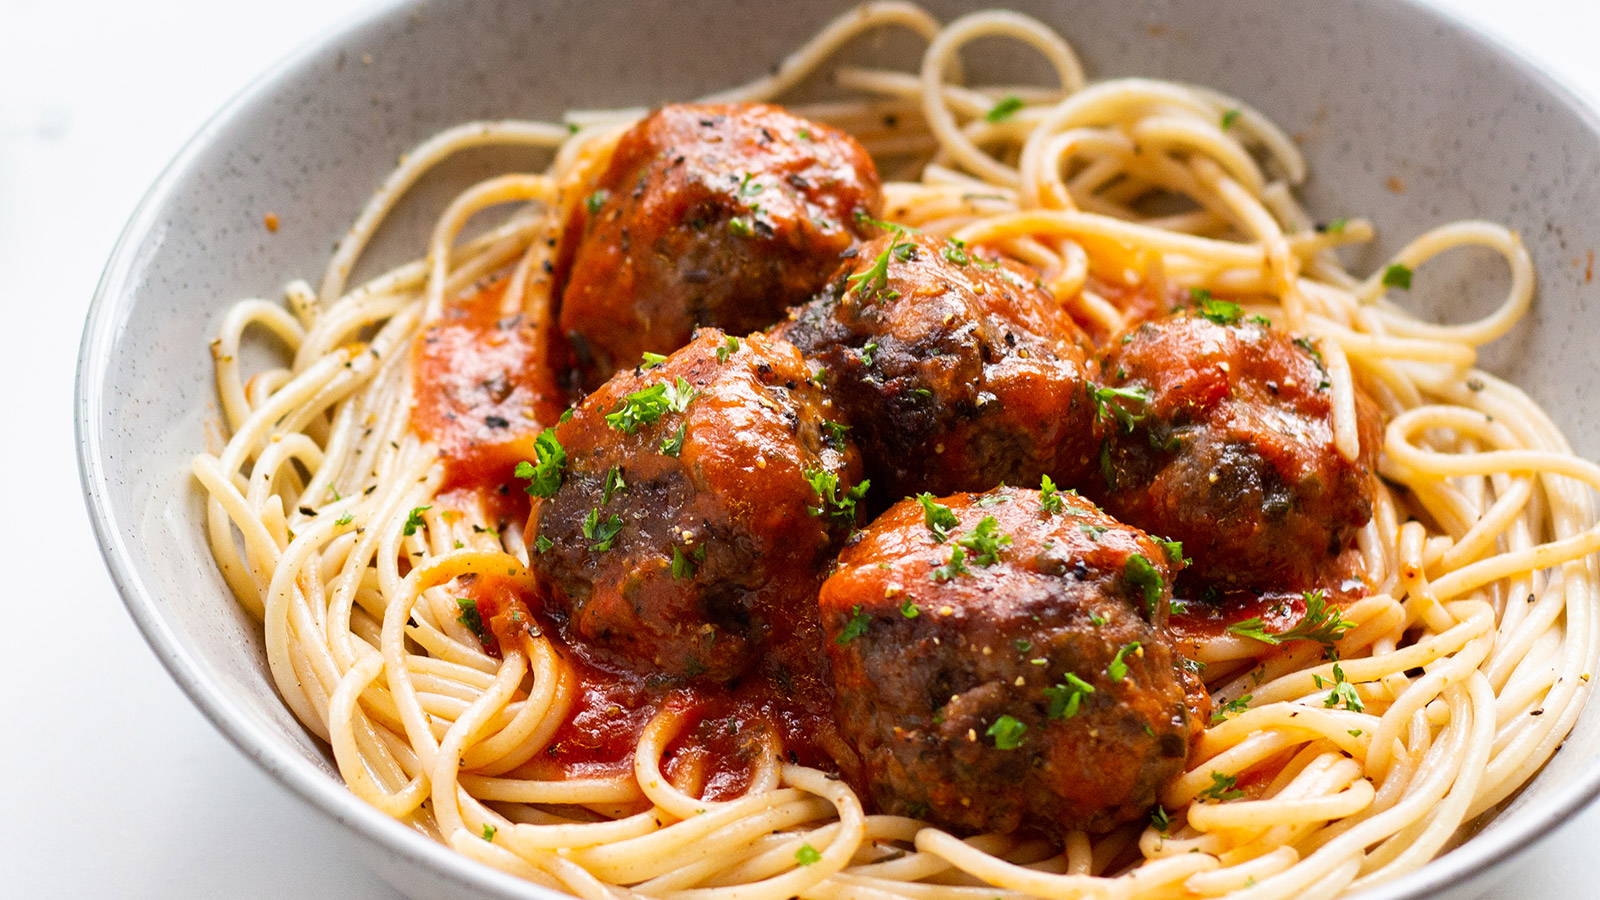 Gourmend recipe for low fodmap meatballs with homemade tomato sauce